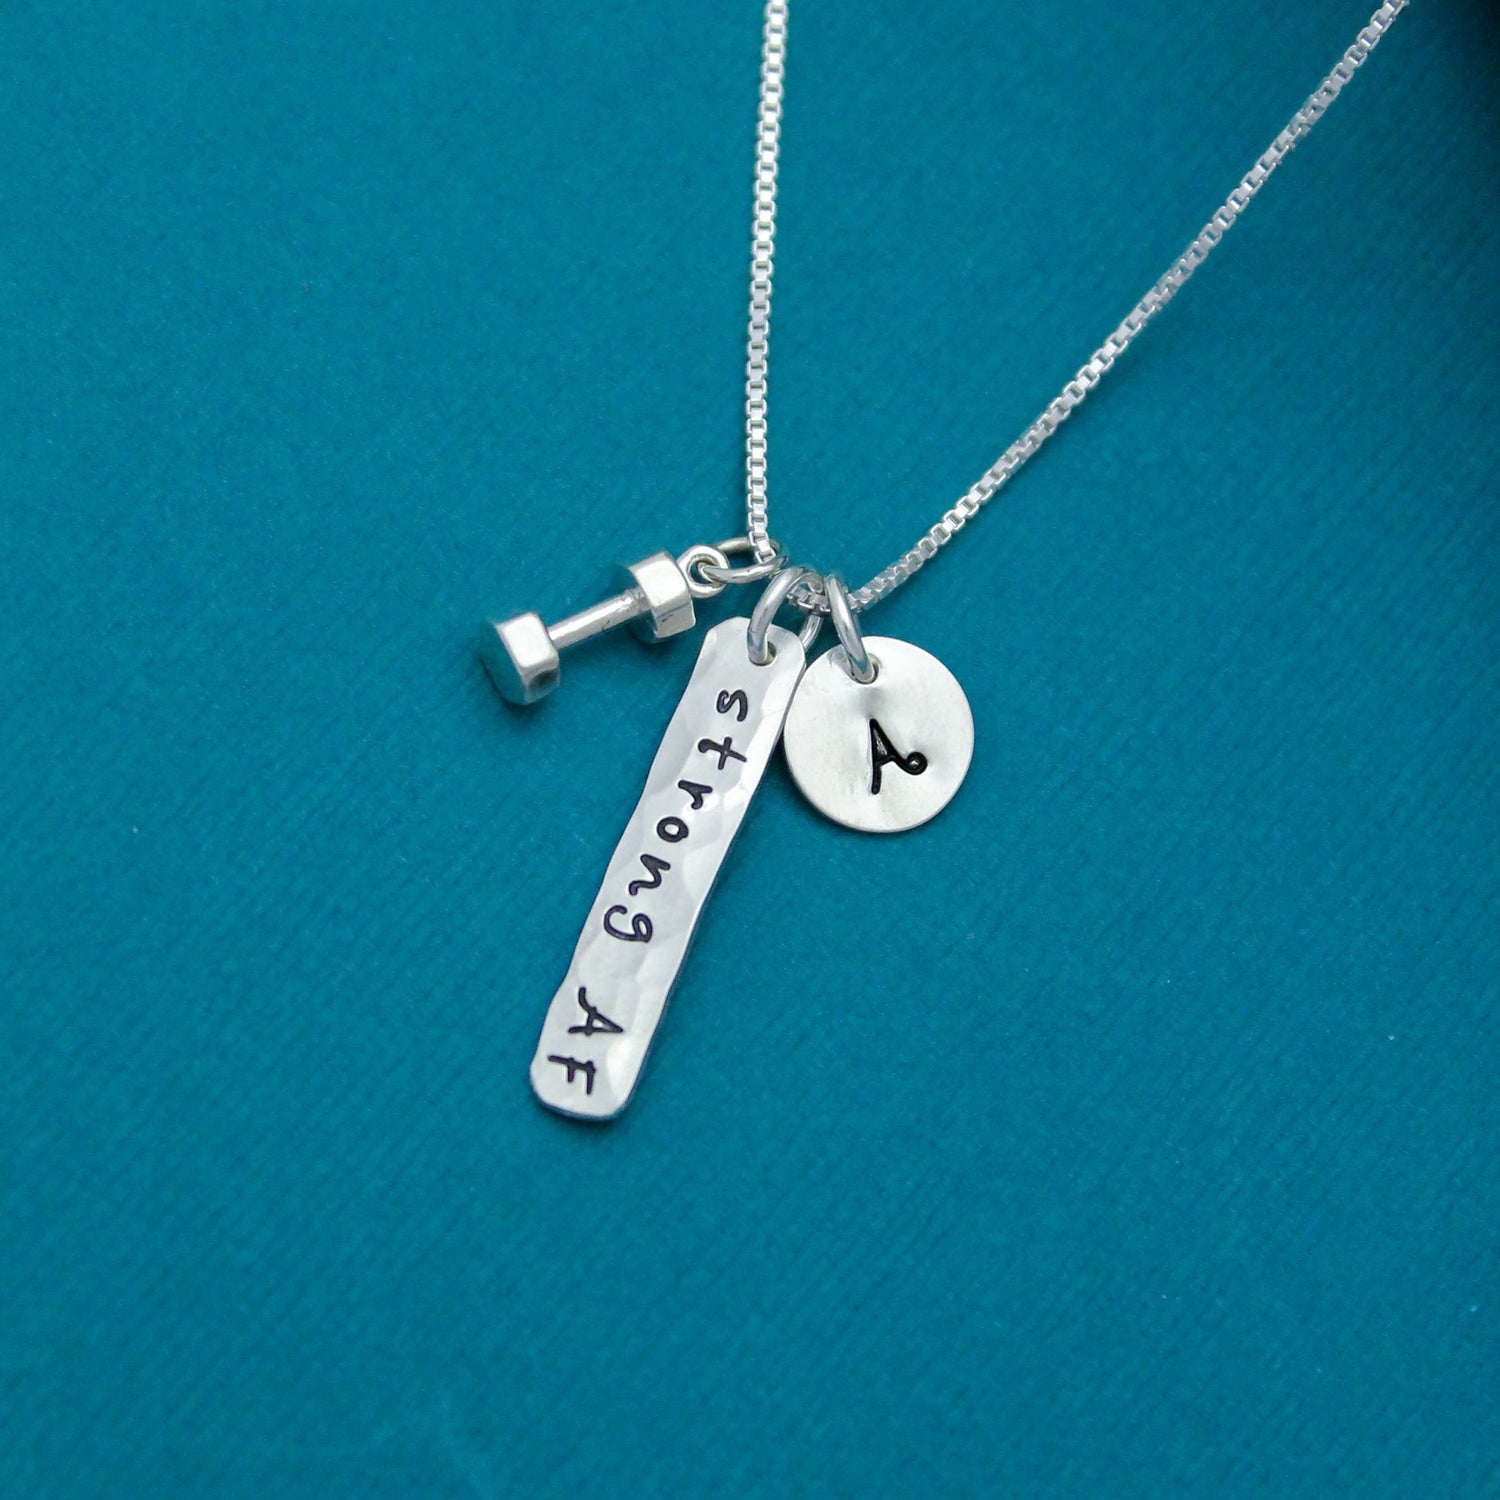 Strong AF Necklace in Sterling Silver with Initial, Motivational Inspirational Jewelry, Strong As Fuck Jewelry, Curse Word Jewelry Gift